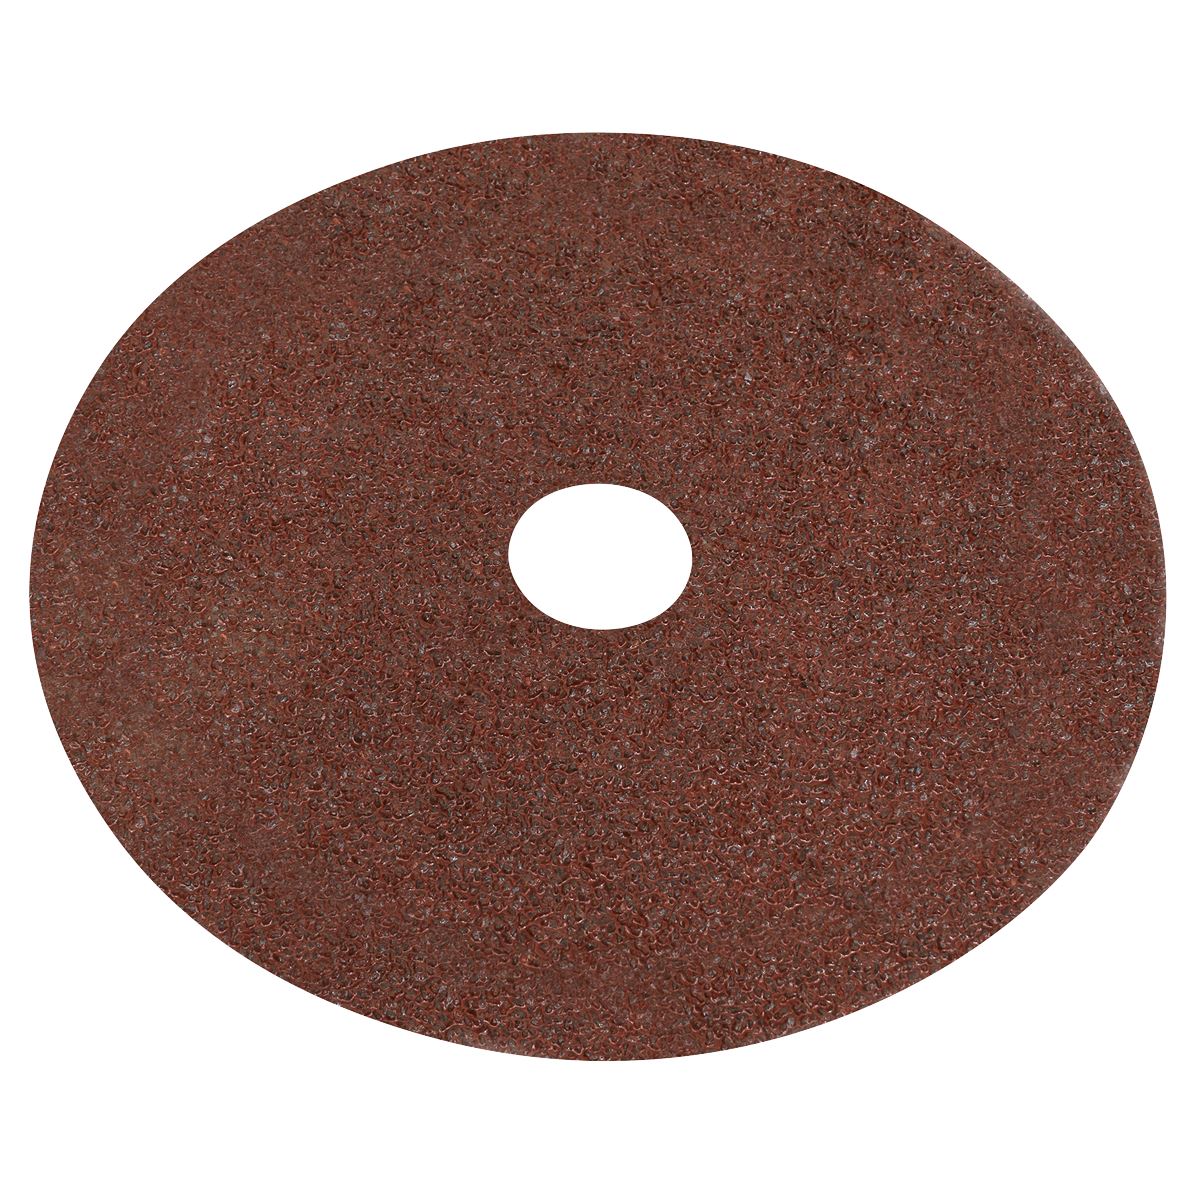 Worksafe by Sealey Fibre Backed Disc Ø100mm - 24Grit Pack of 25